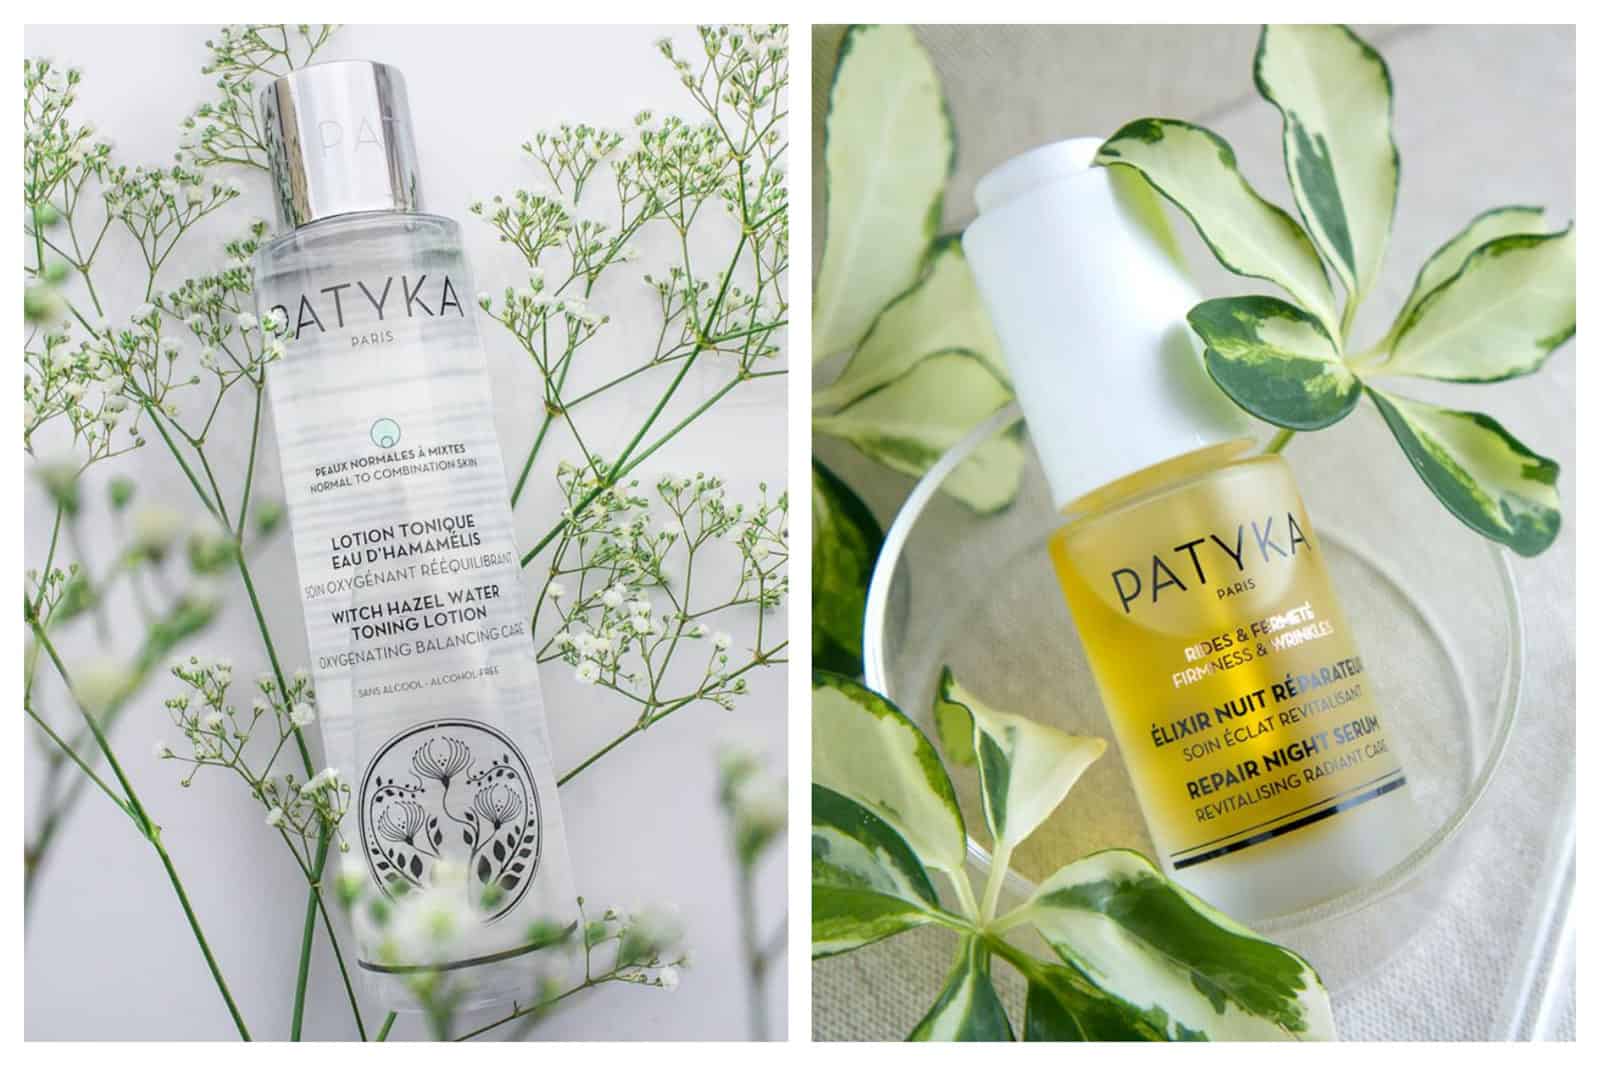 Natural, made-in-France oils and creams by Patyka are also available at French beauty brand store in Paris, Oh My Cream!